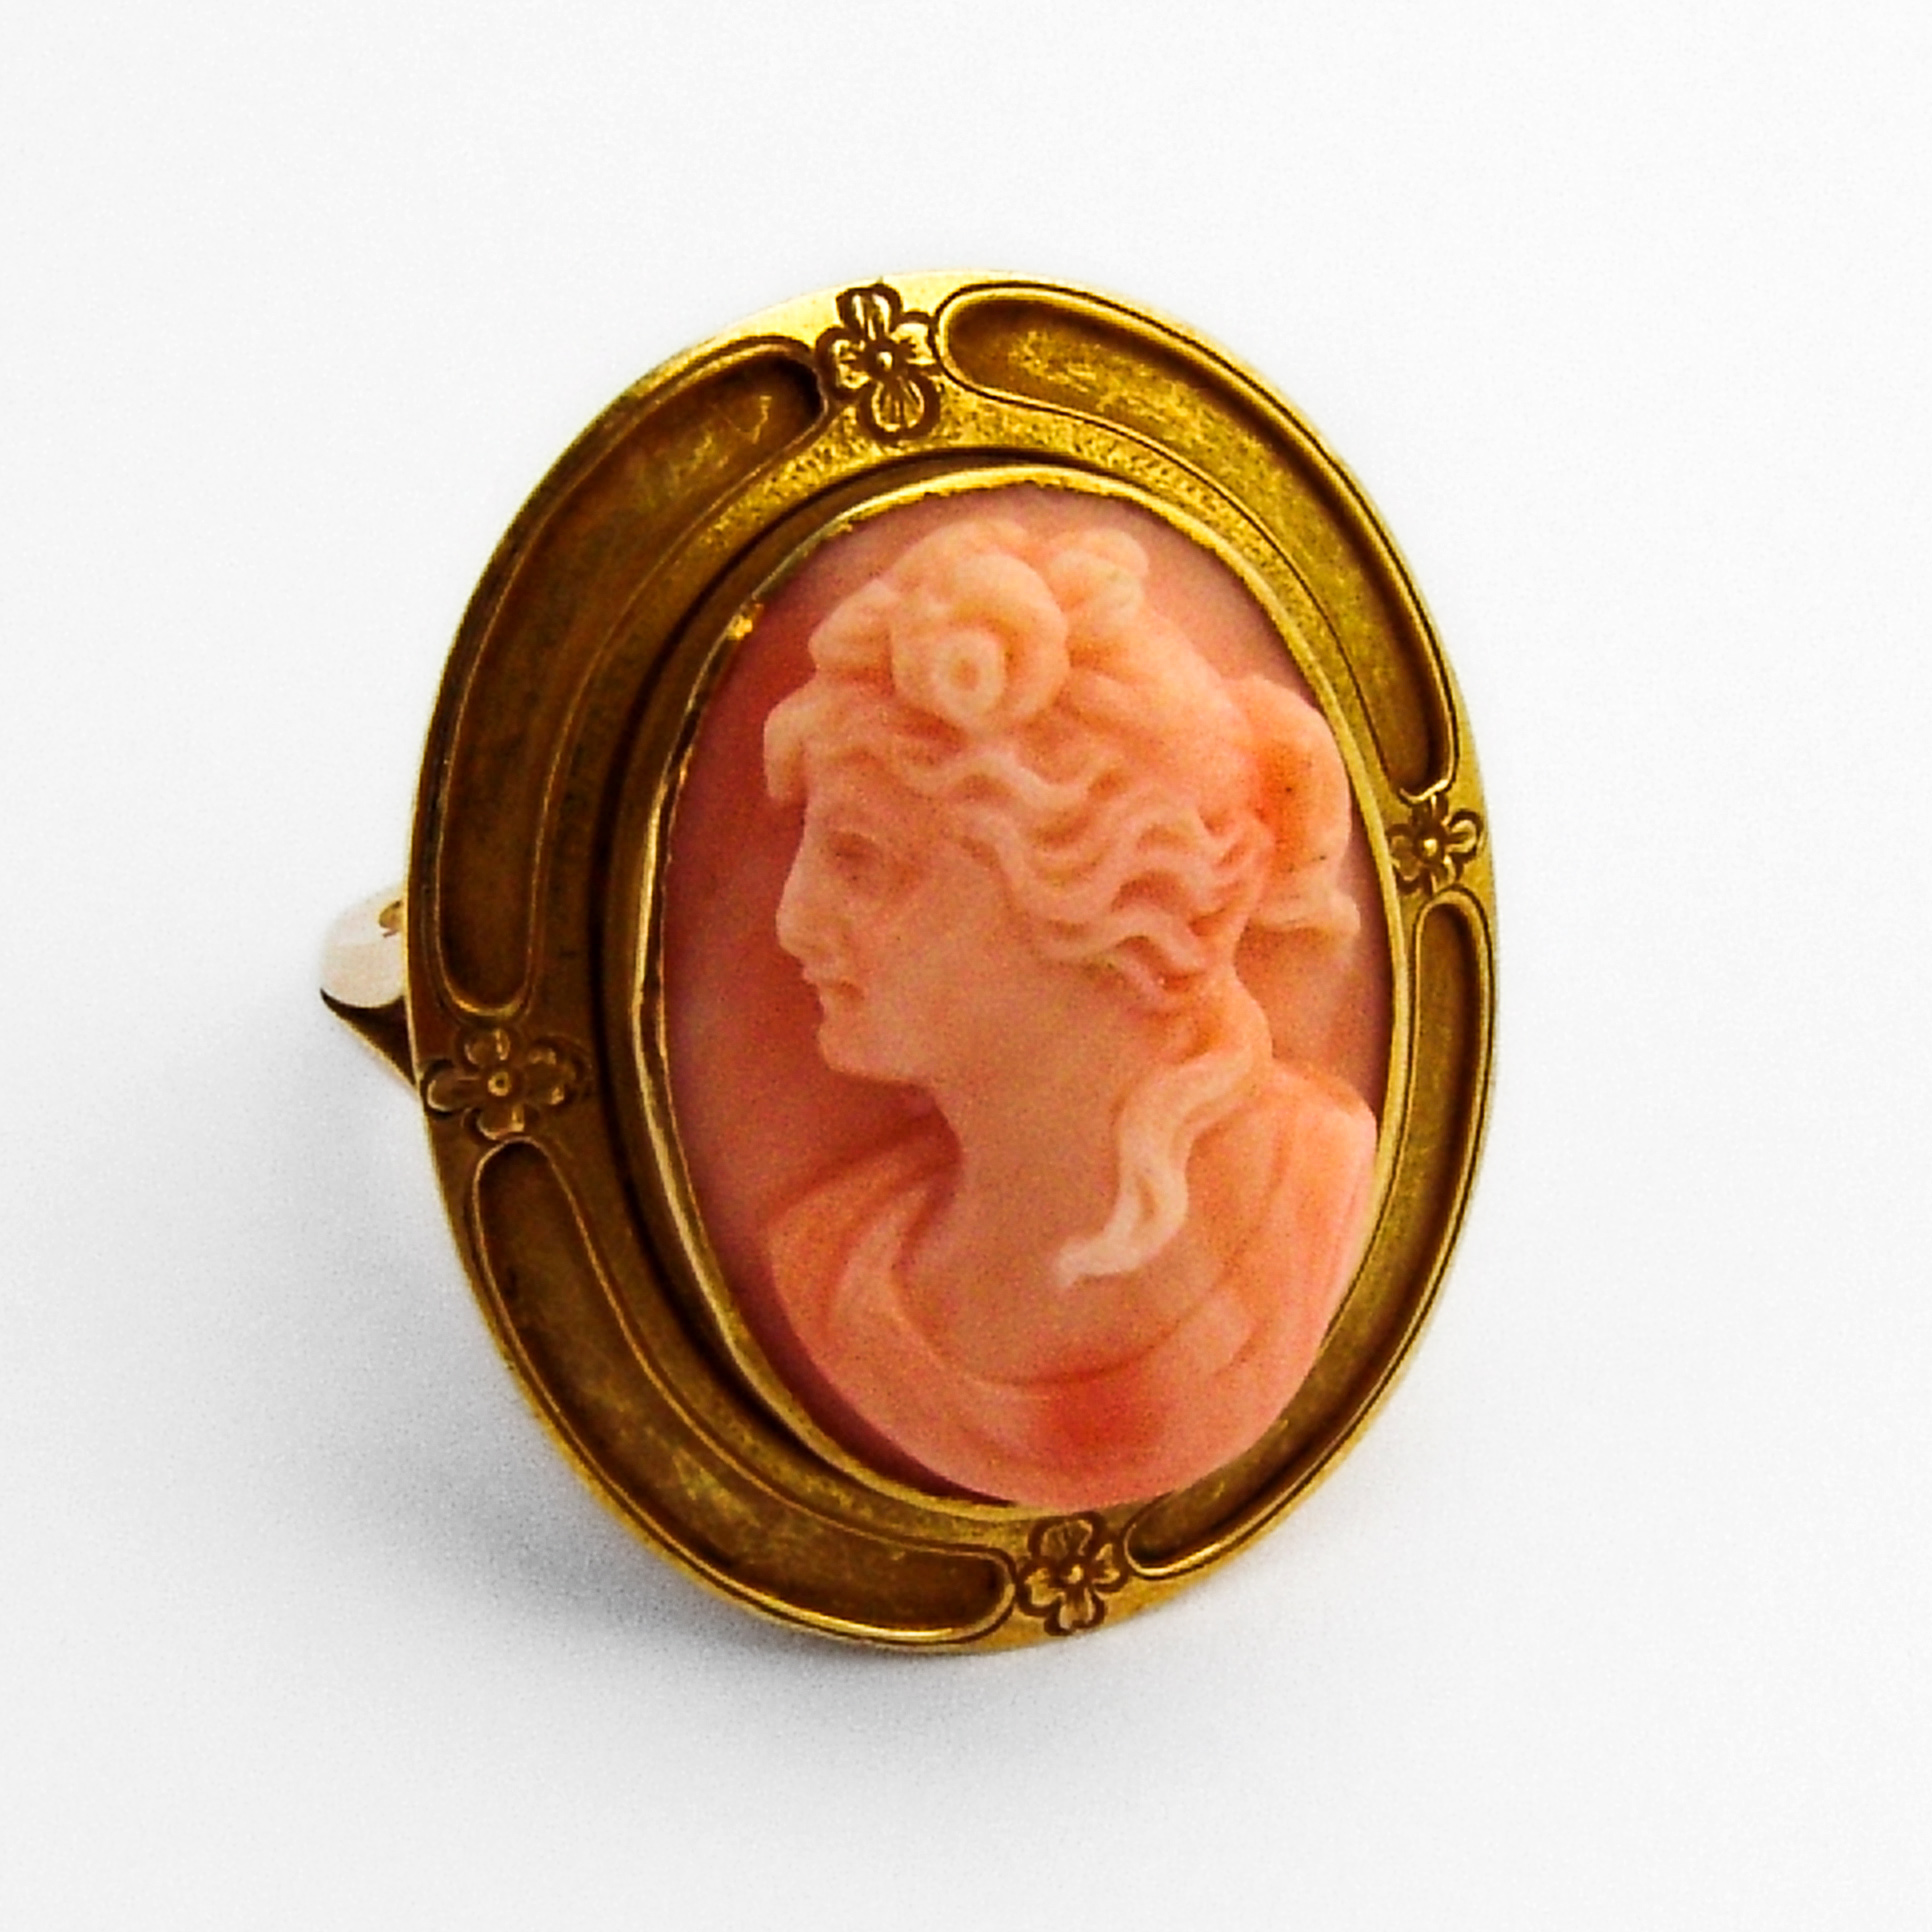 Antique High Relief Pink Coral Cameo Ring 14K Gold | eBay